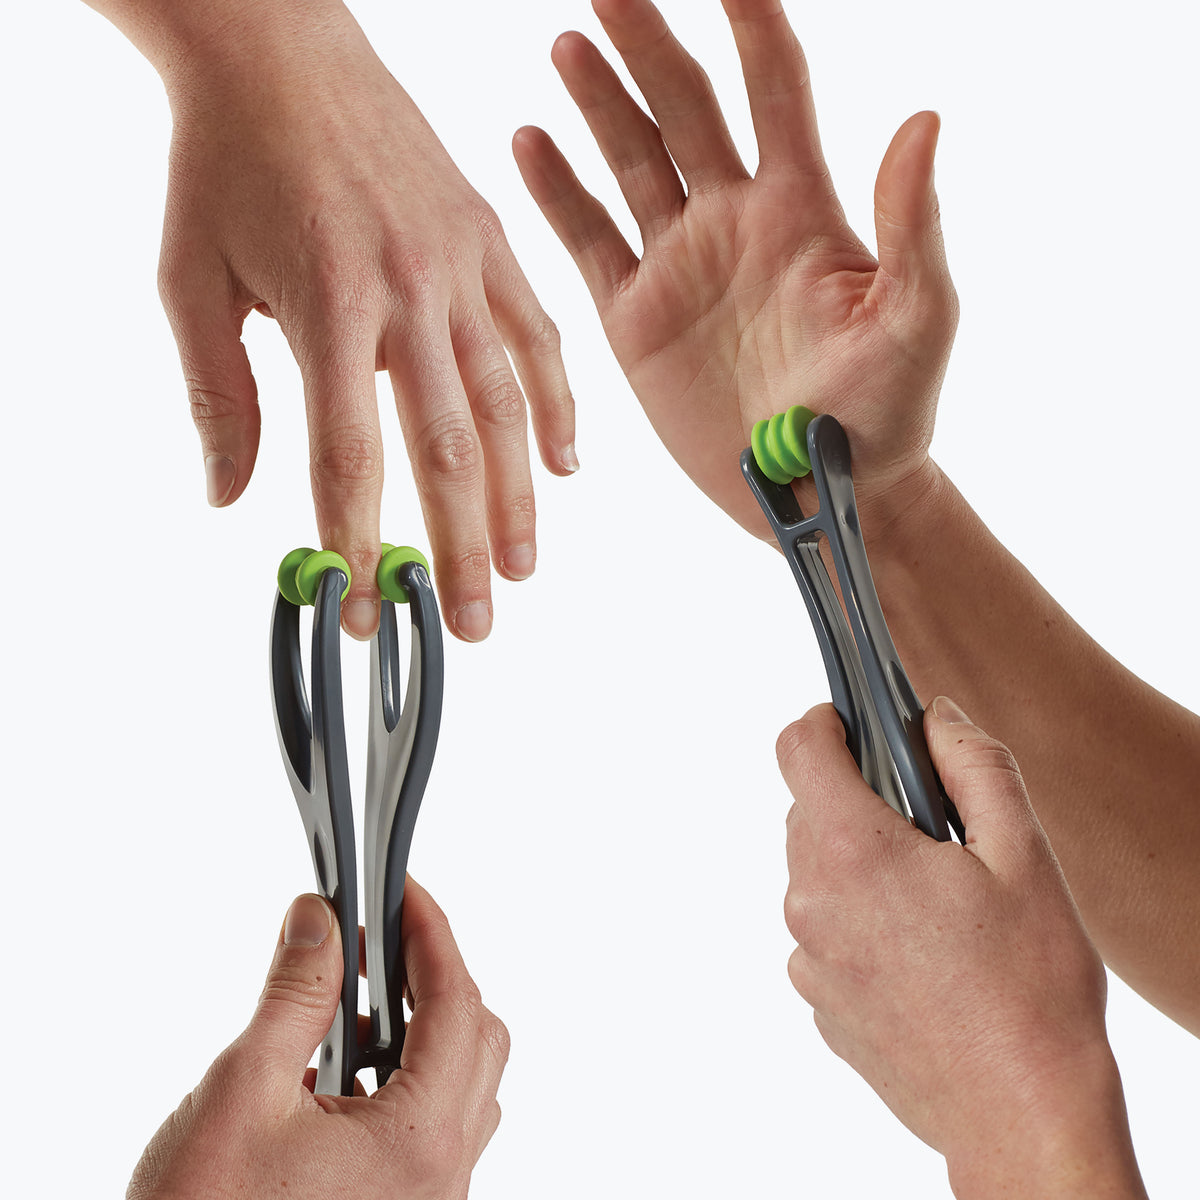 Showing 2 different ways to use the Dual Finger Massager